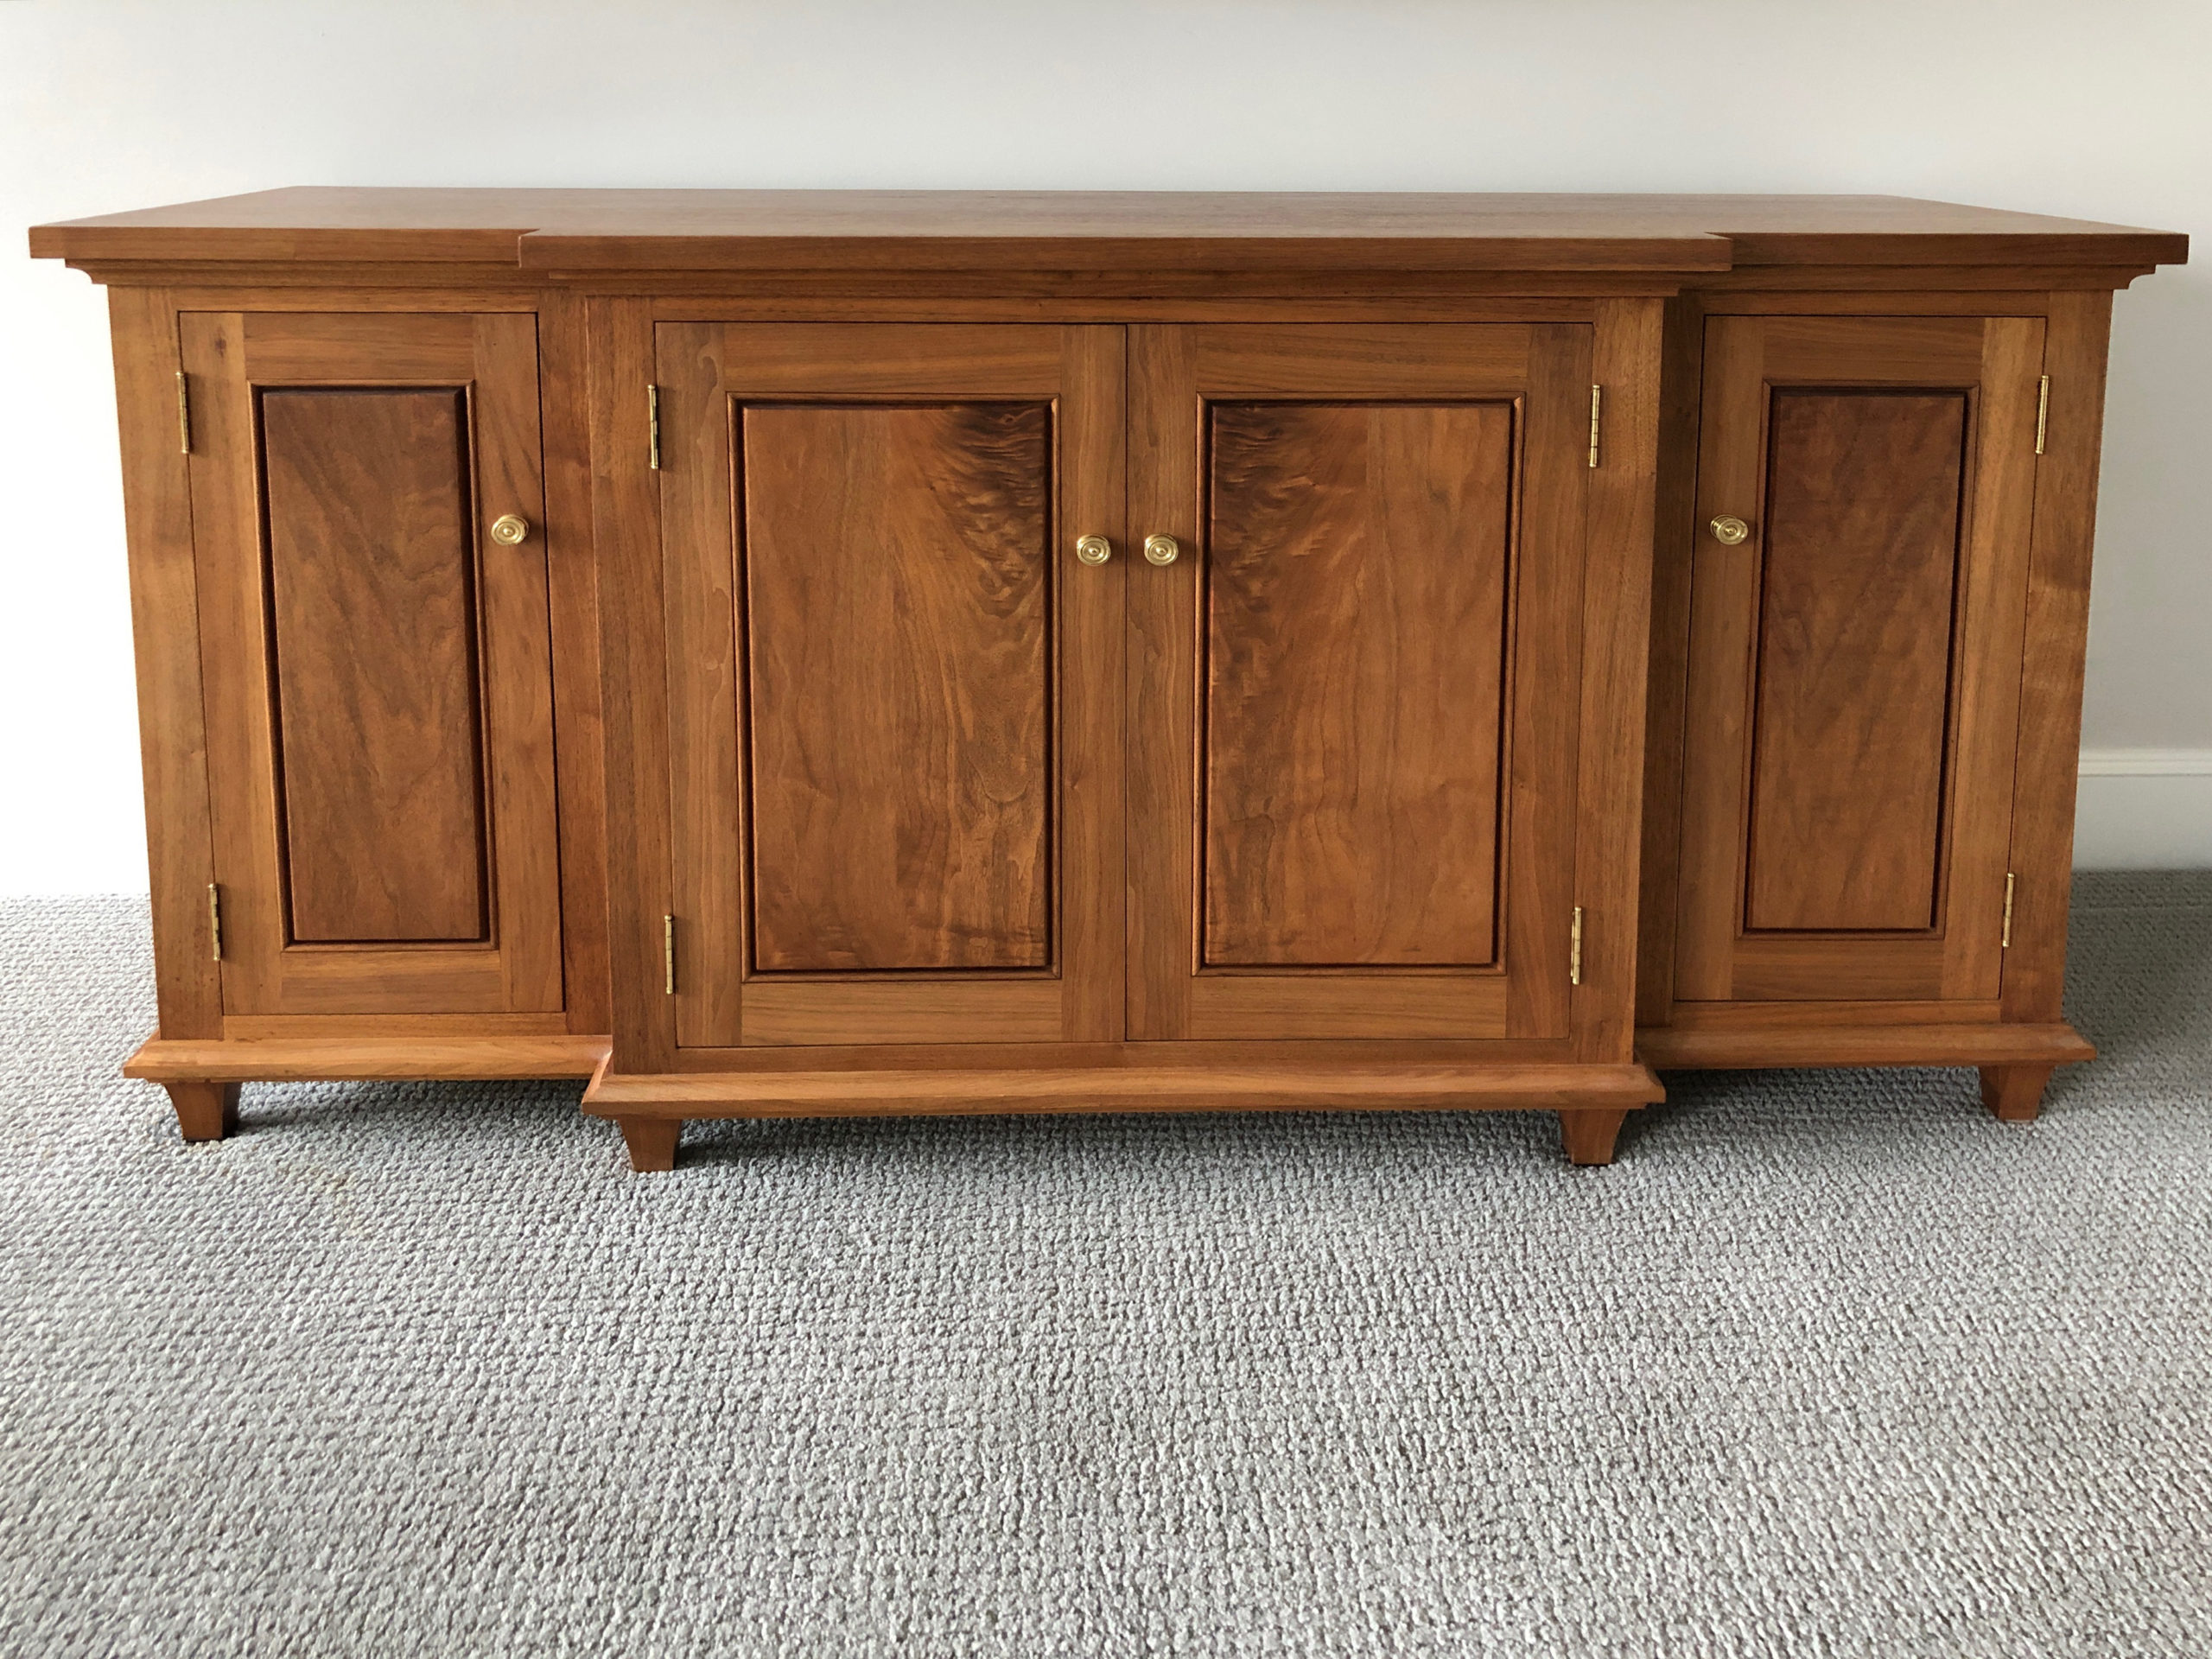 Sideboard in Black Walnut and Maple